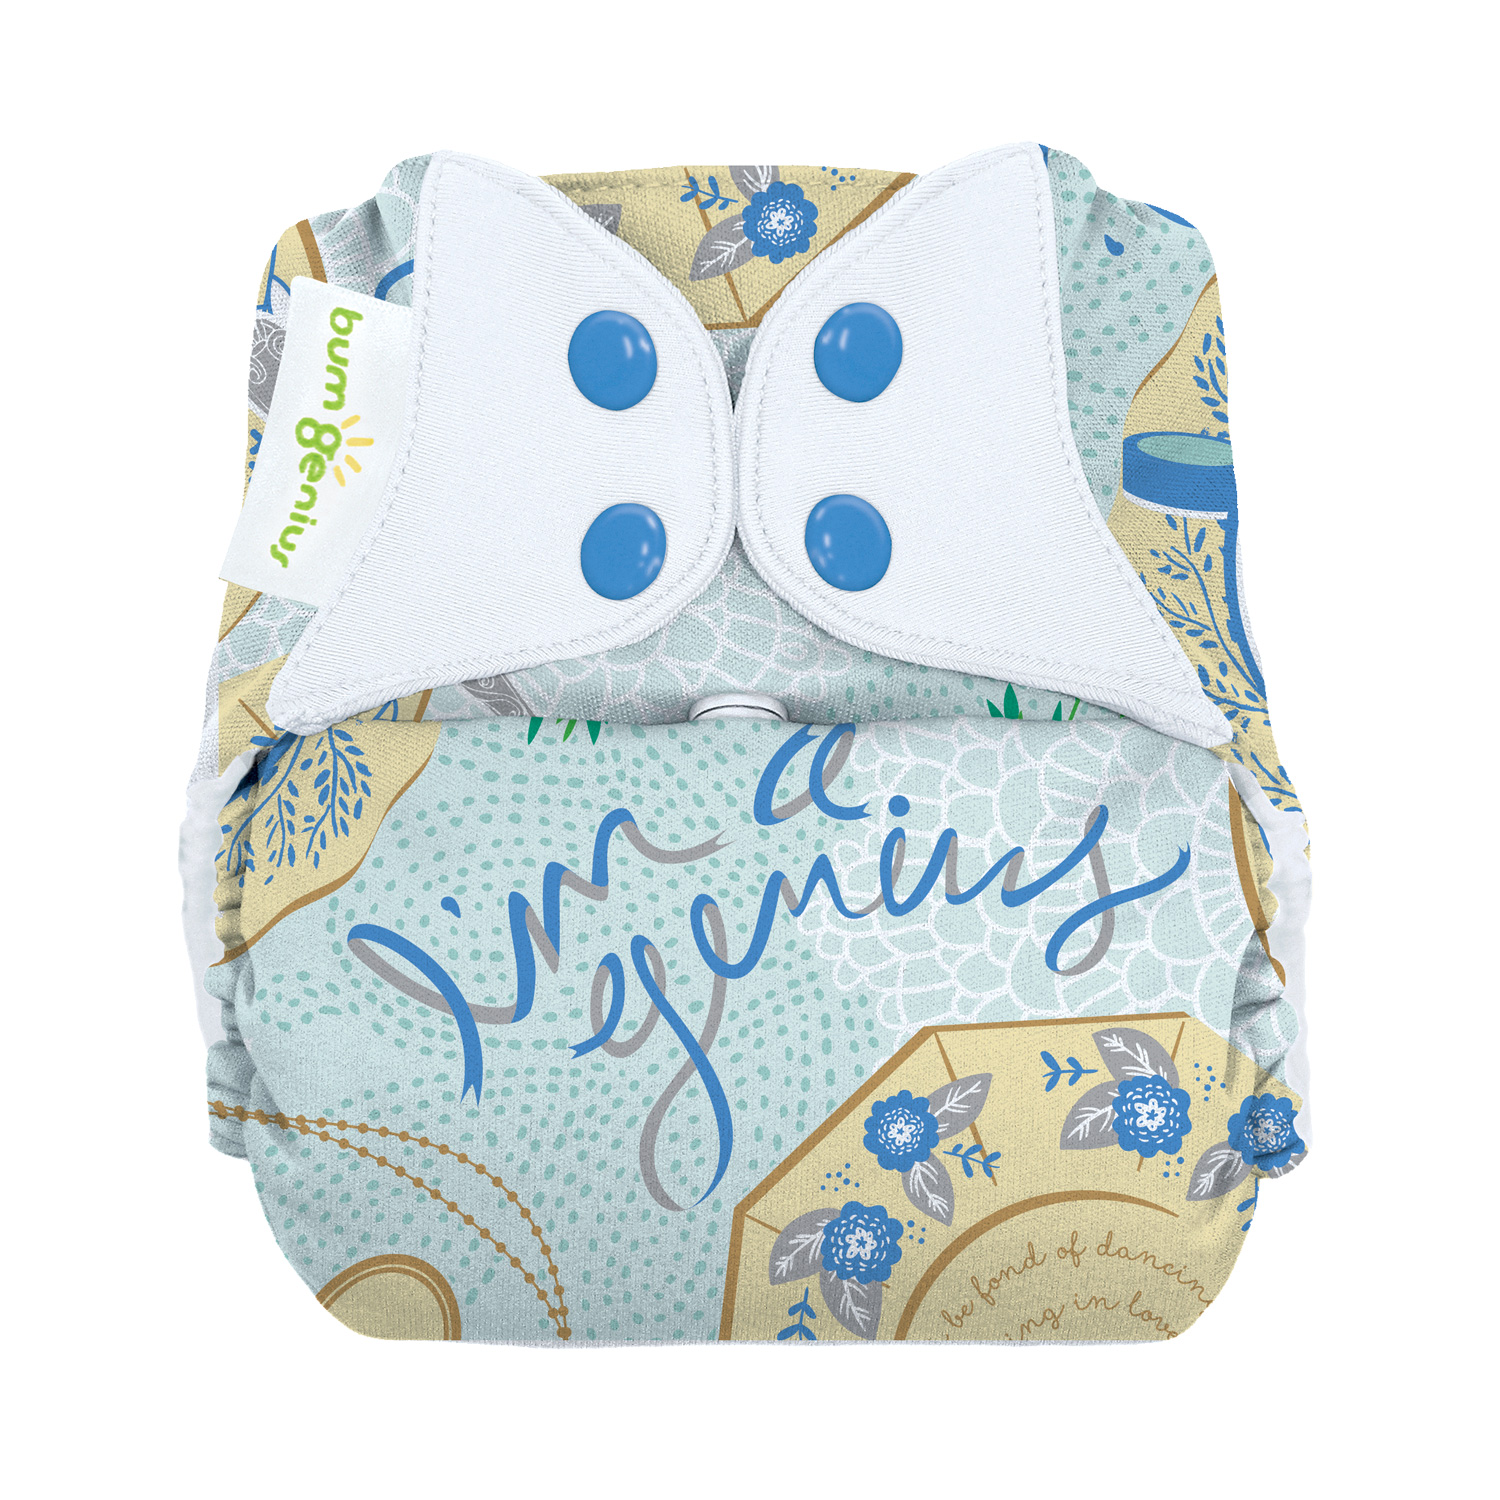 Cotton Babies Welcomes 2 New Geniuses to Its Cloth Diaper Collection